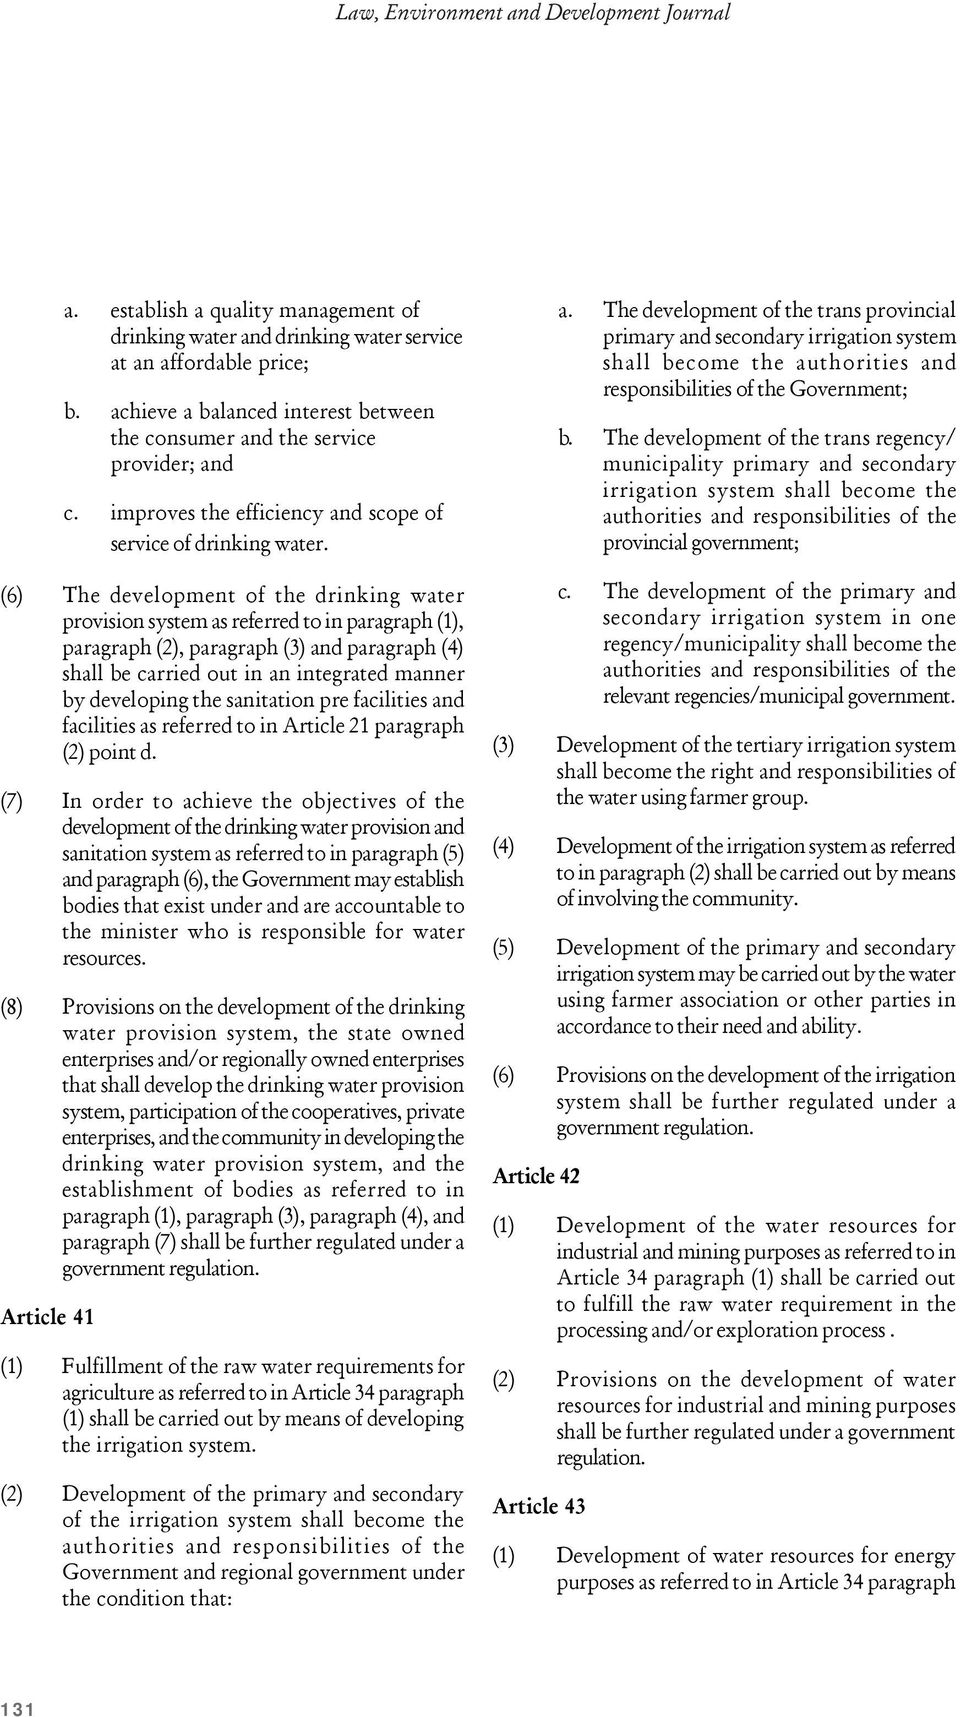 (6) The development of the drinking water provision system as referred to in paragraph (1), paragraph (2), paragraph (3) and paragraph (4) shall be carried out in an integrated manner by developing